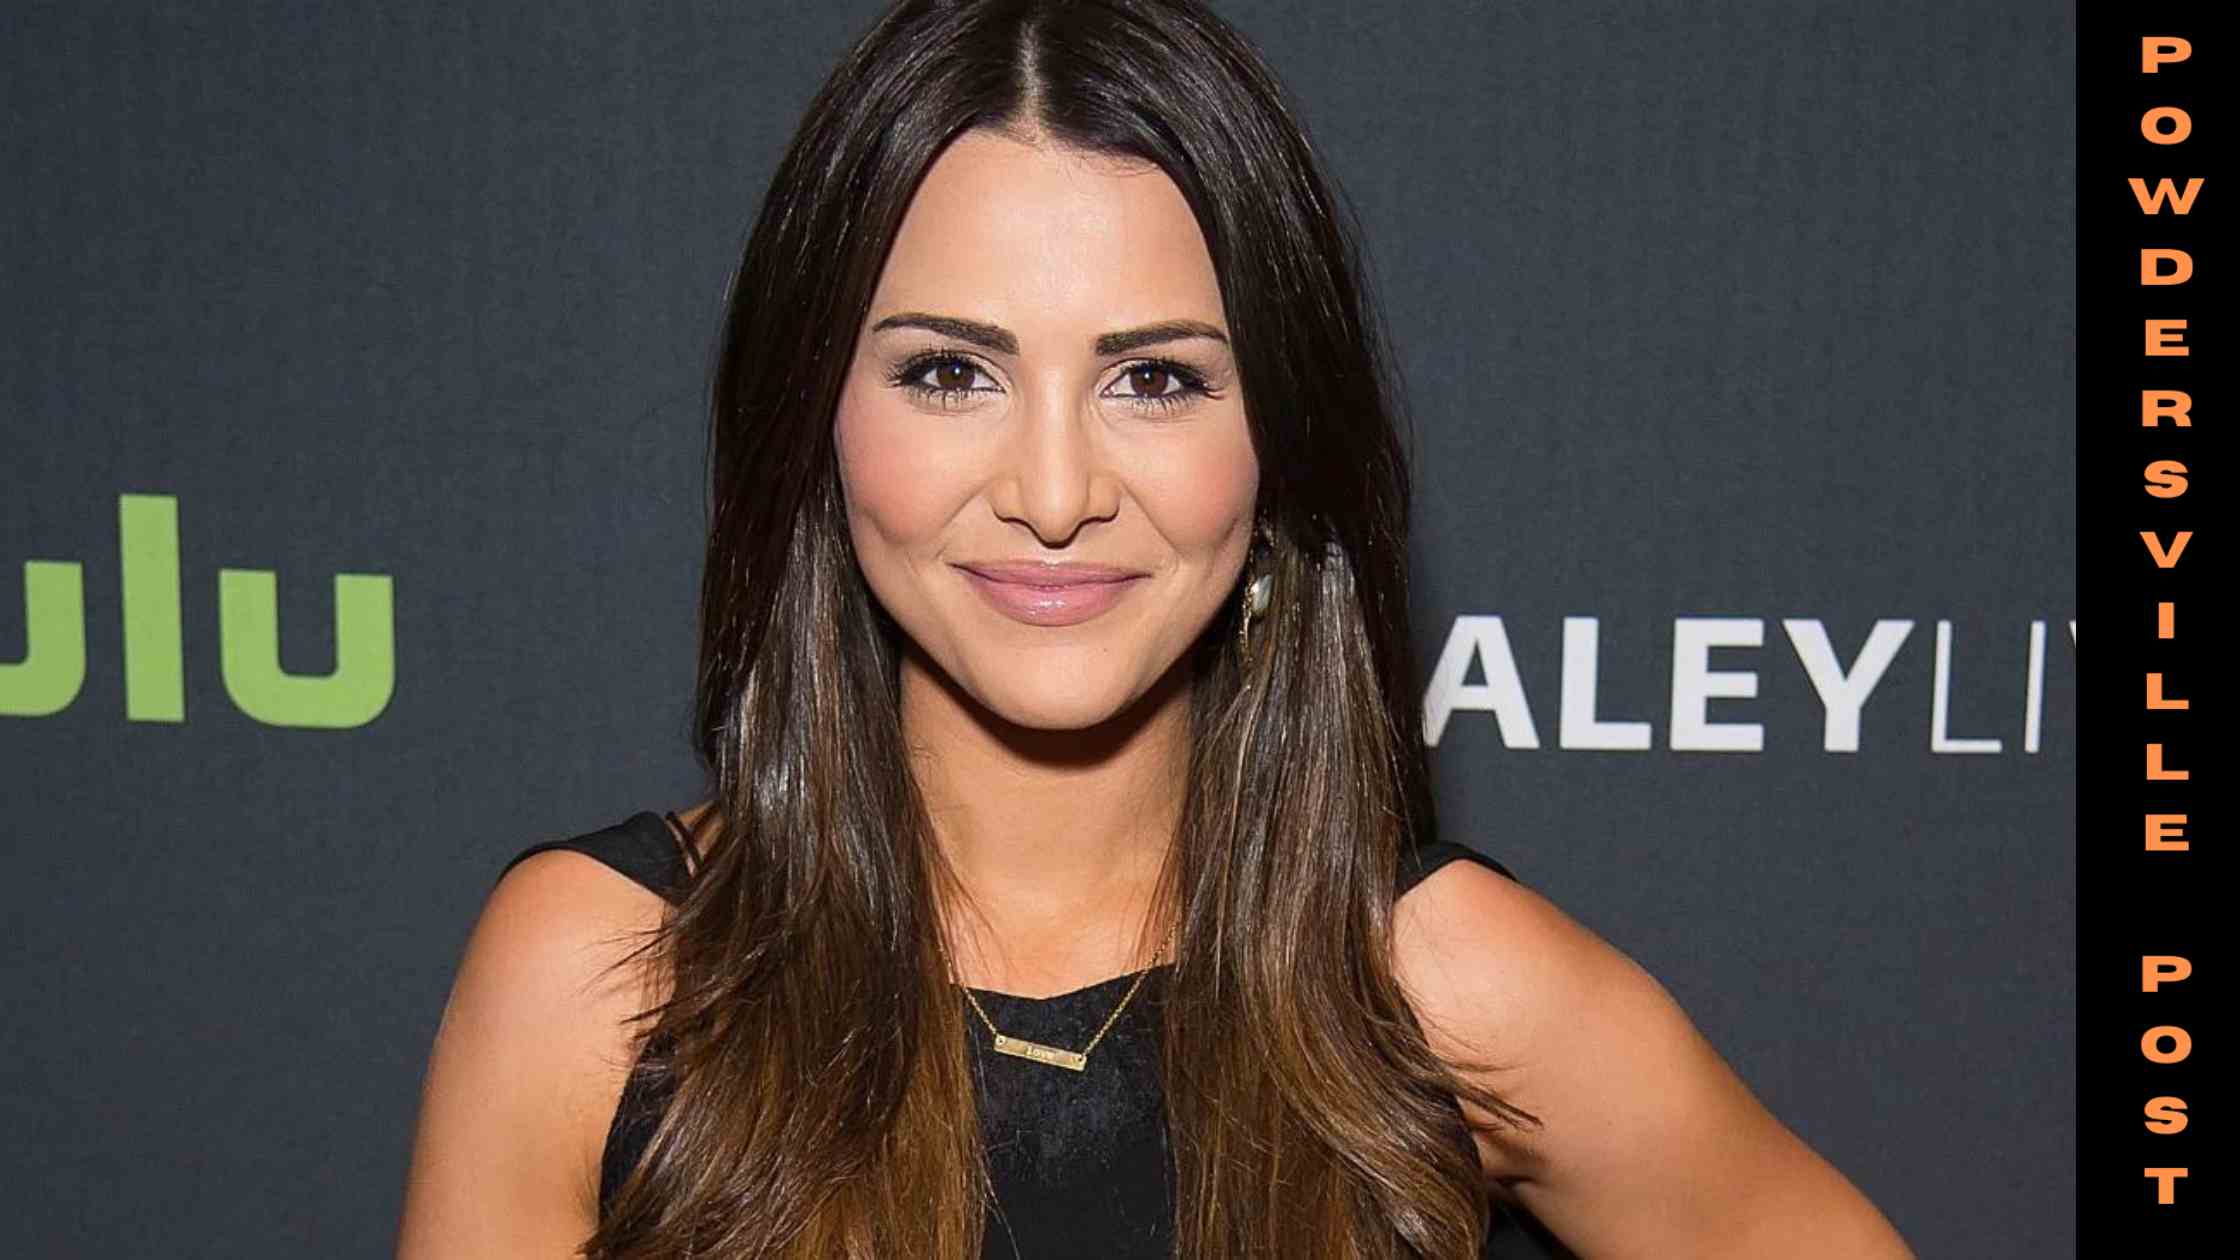 Bachelor Nation's Andi Dorfman Link-Ups With New Boyfriend, Check Out Details Of Who The Boyfriend Is